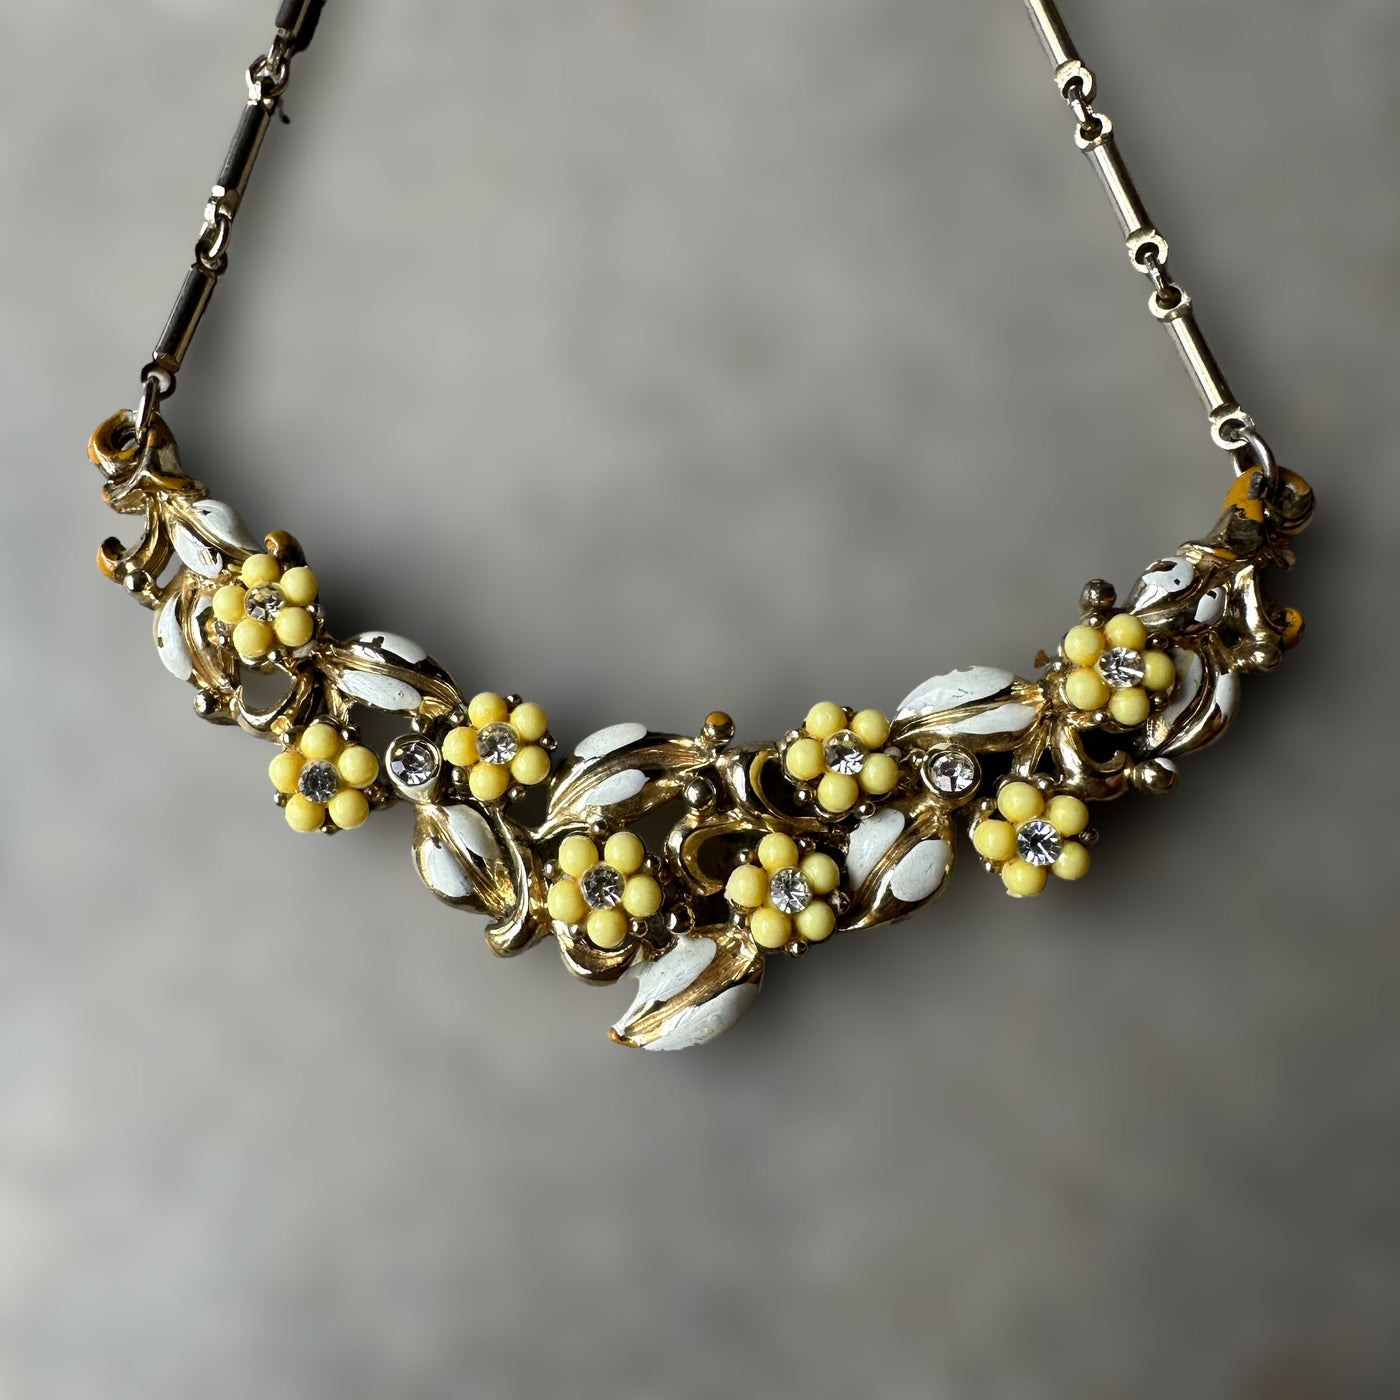 vintage yellow flower necklace by CORO, gold-tone chain